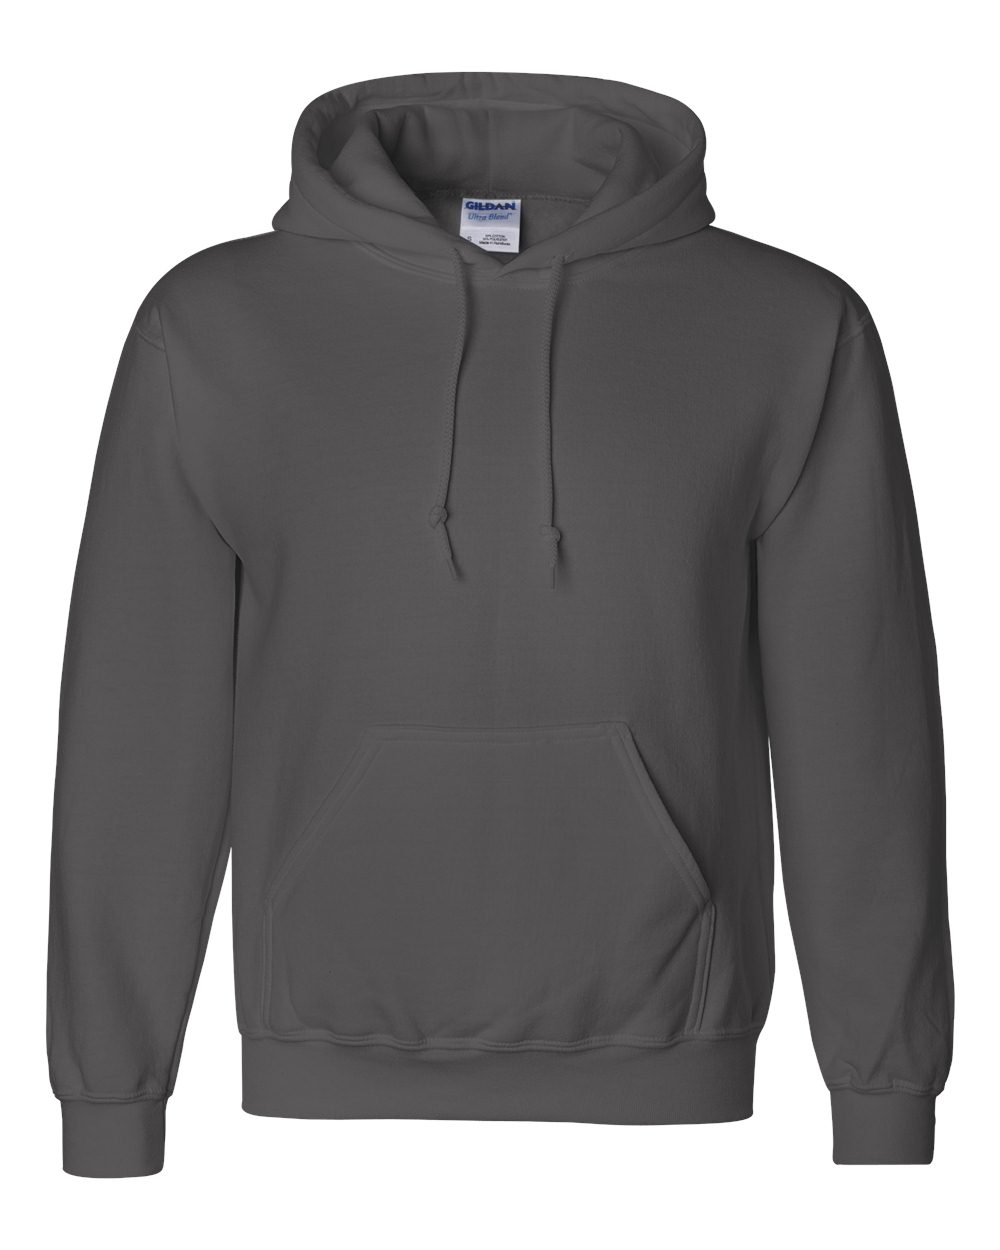 Gildan® - Hooded Sweatshirt - 12500 | 9 Oz./yd² (Us) , 50/50 Cotton/polyester, 21 Singles | Wrap Yourself in Comfort and Style with Our Crewneck Sweatshirt, the Epitome of Cozy Fashion for Any Occasion